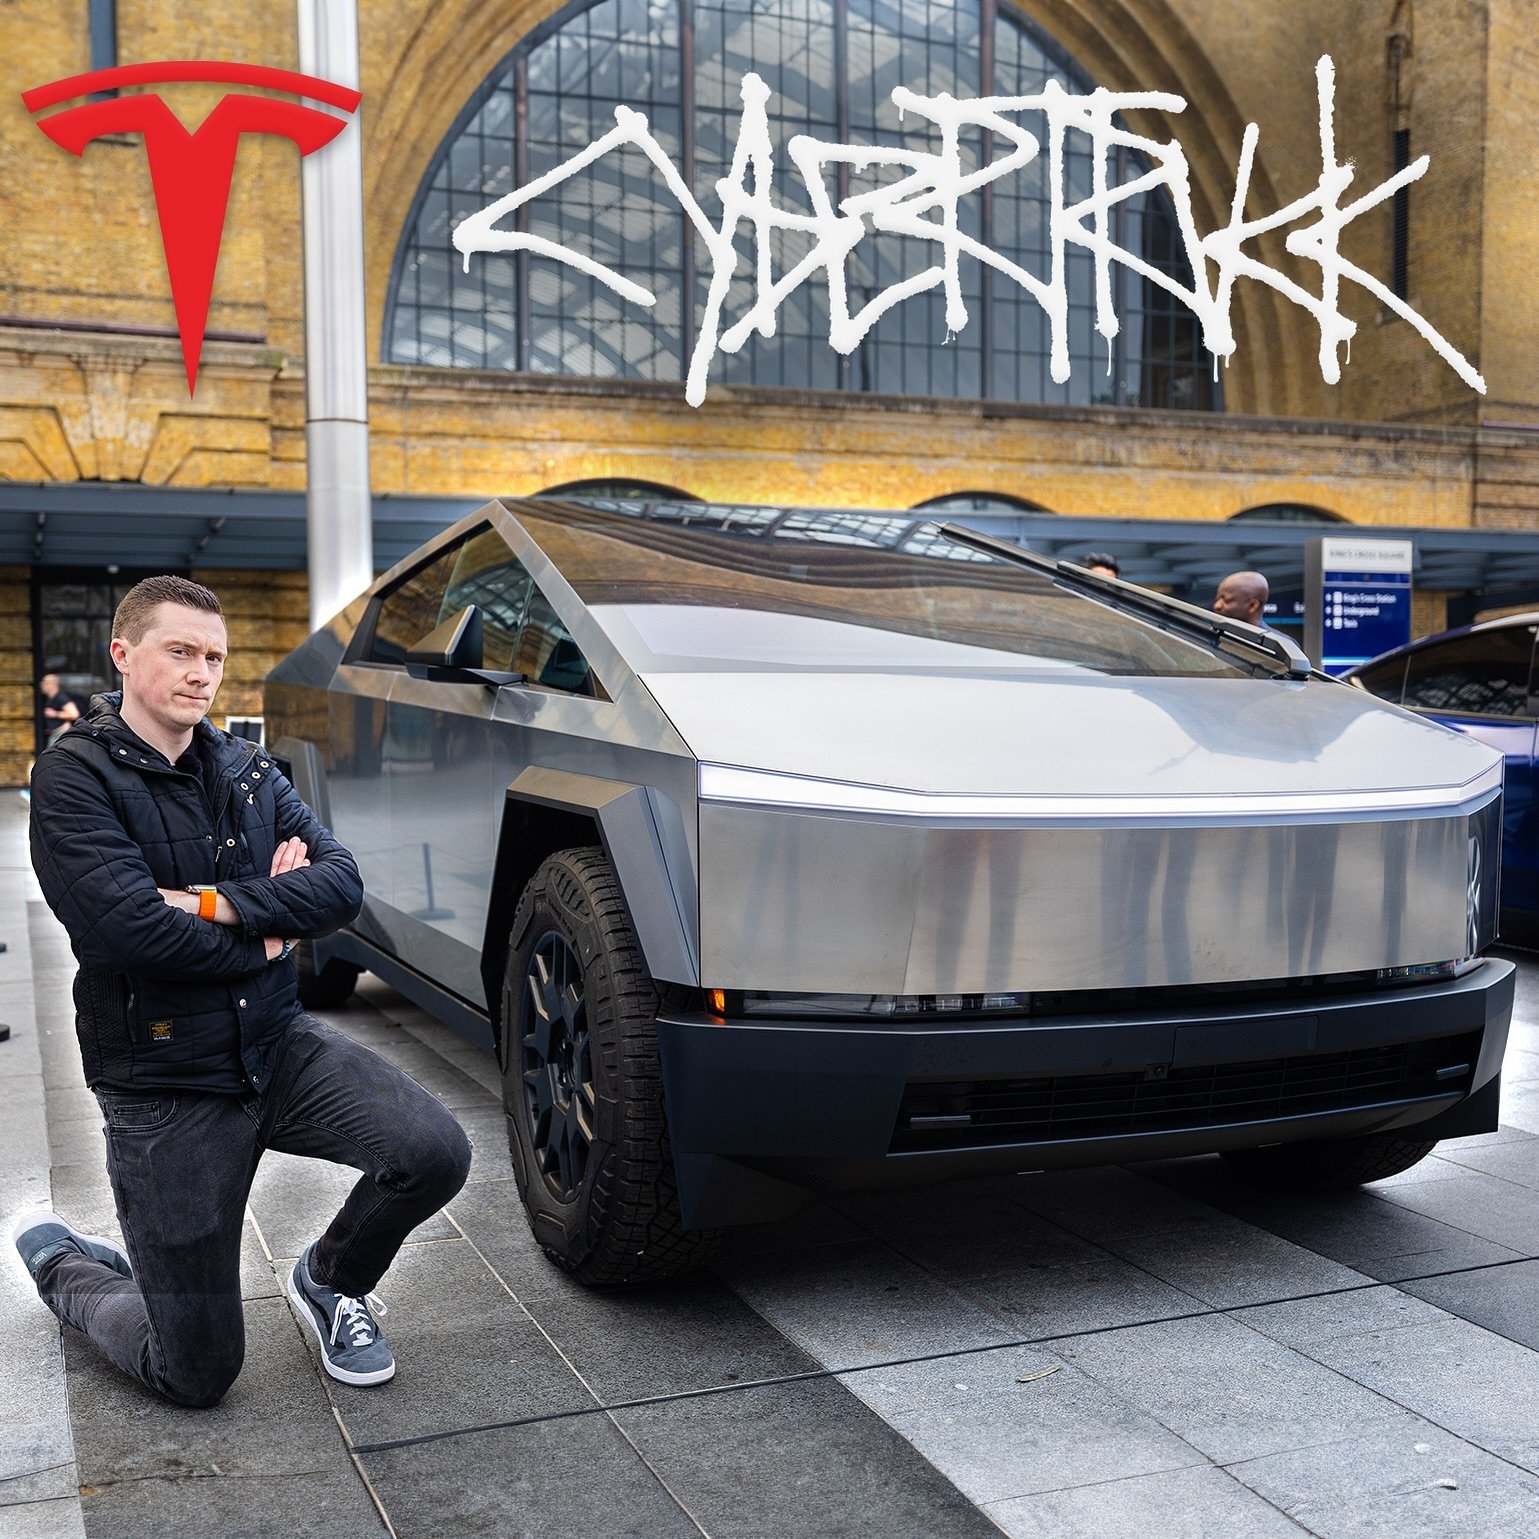 I NEVER thought I&rsquo;d get to see this in person🤯&hellip; but the Tesla Cybertruck is touring round Europe and made a stop in London so I had to go see it! First Impressions video on my YT channel!

#Tesla #Cybertruck #TeslaCybertruck 

Go see it